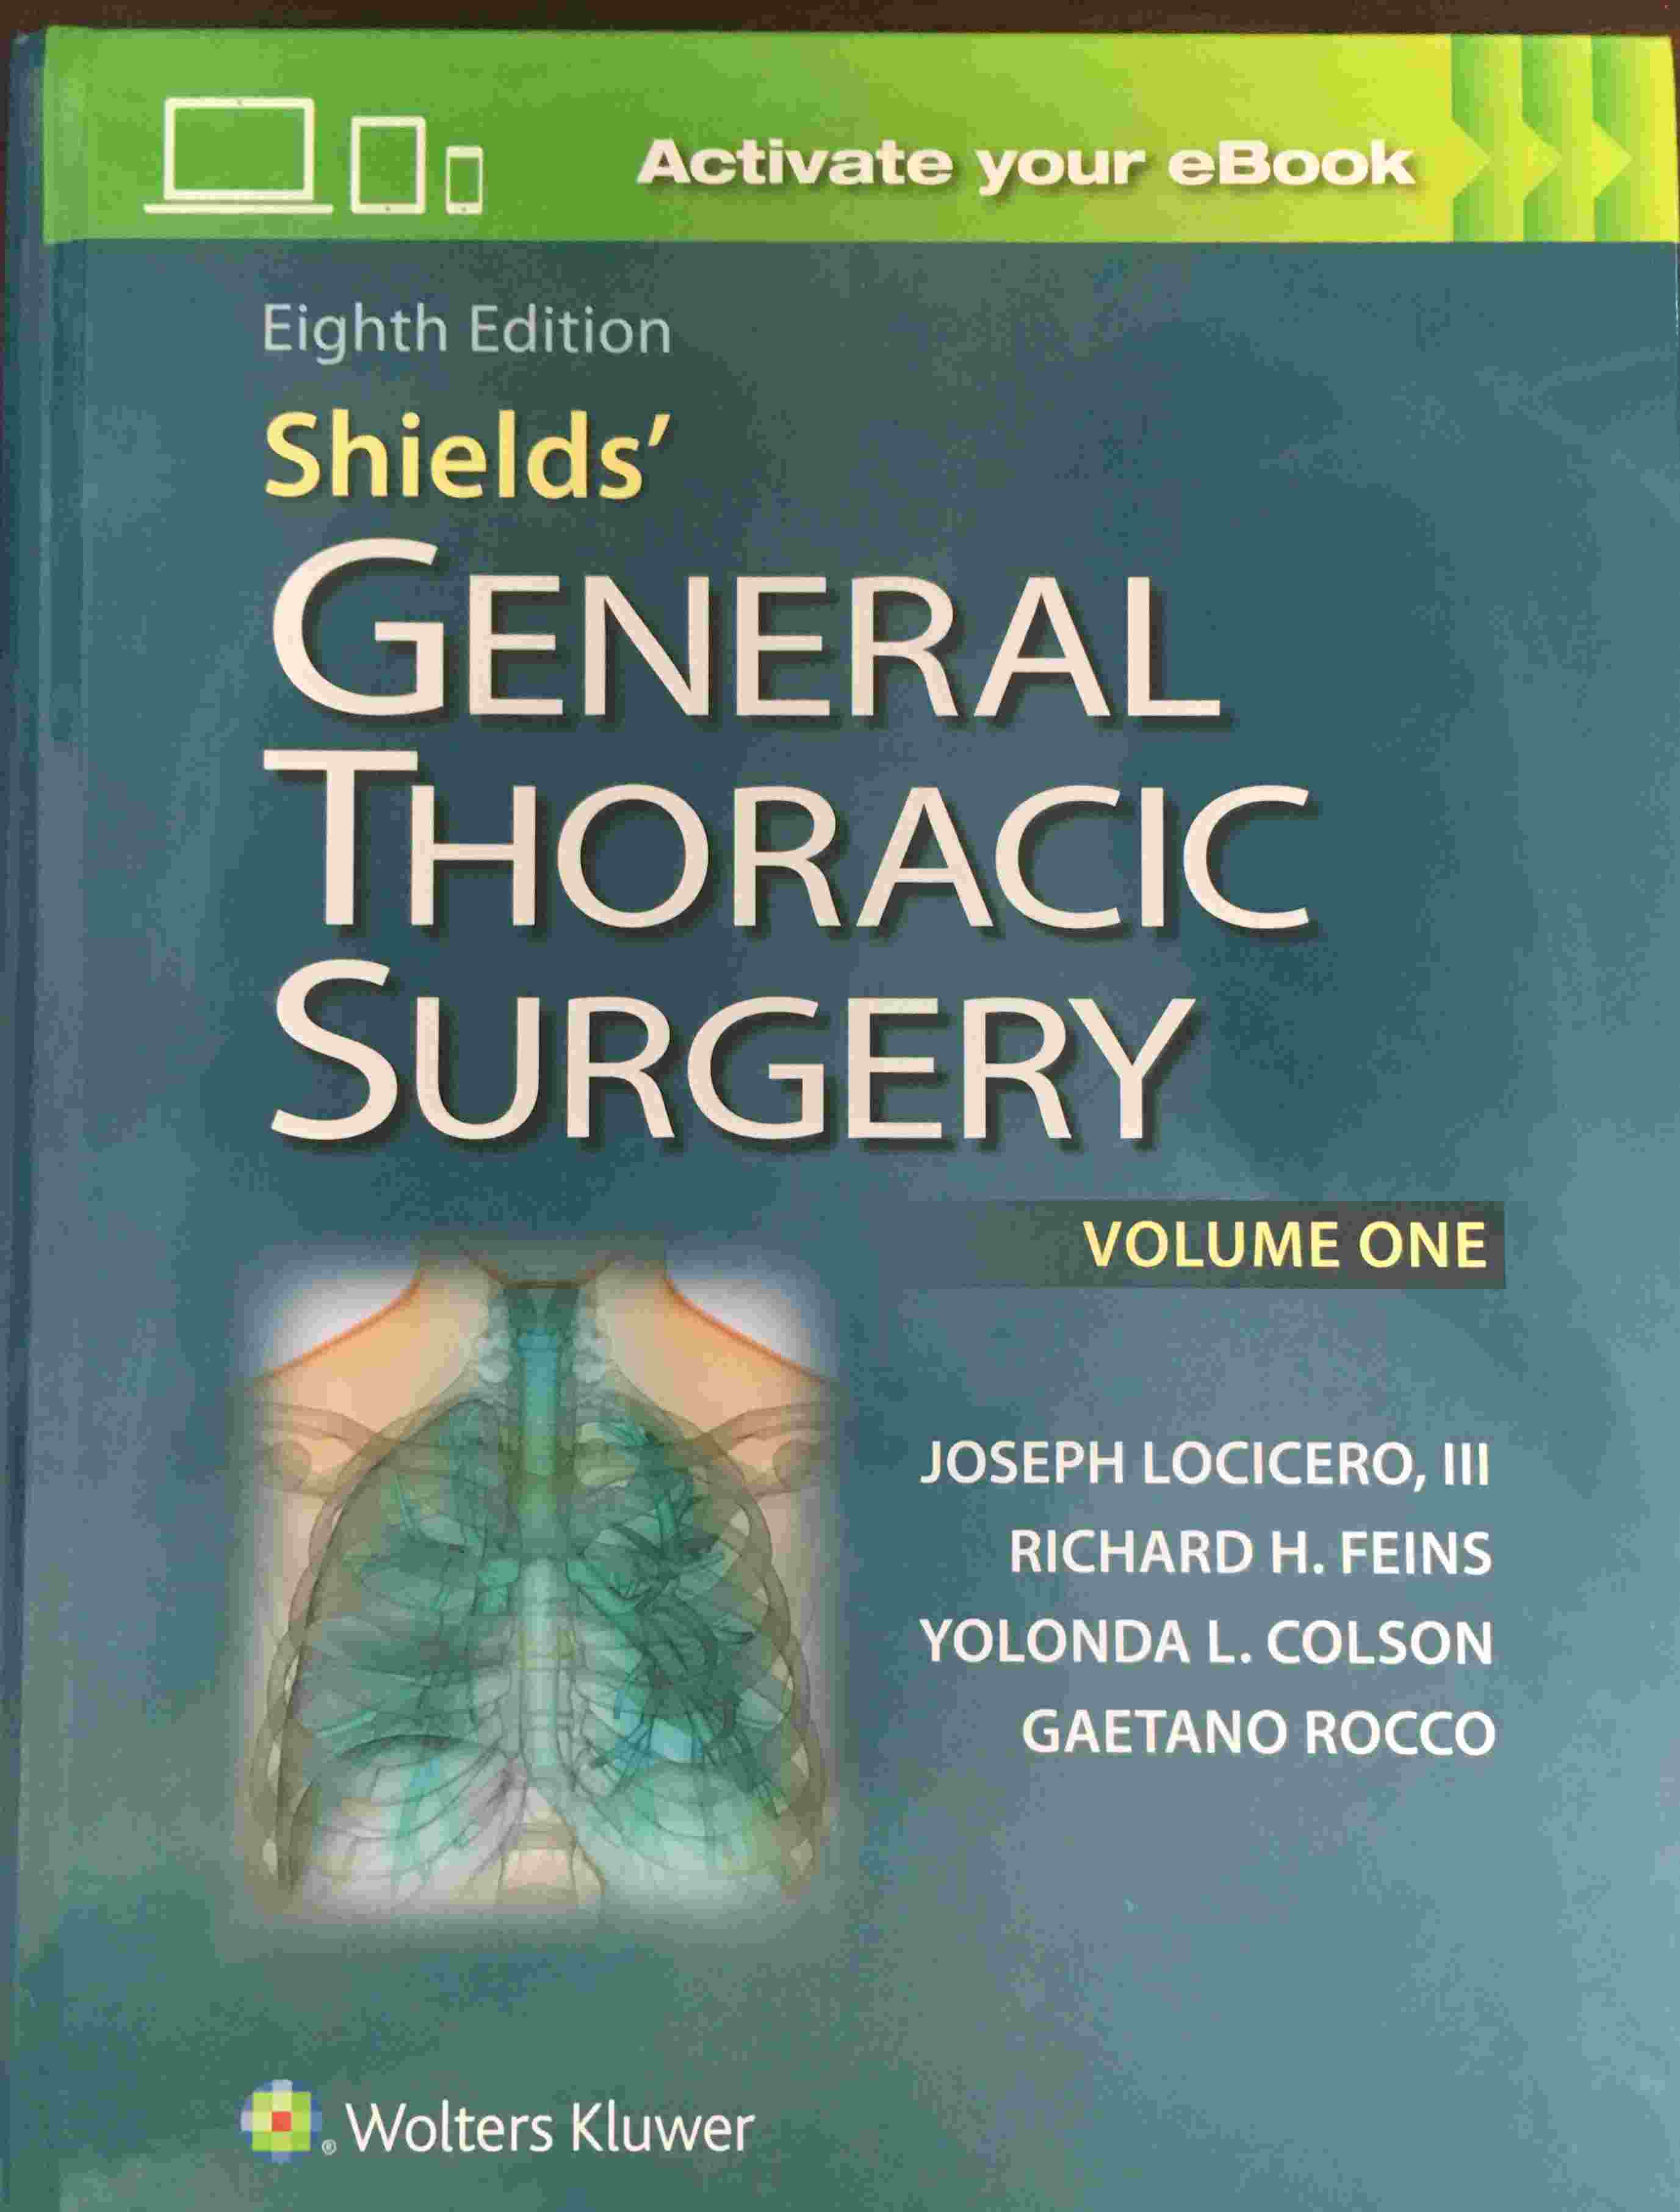 «Shield's General Thoracic Surgery»